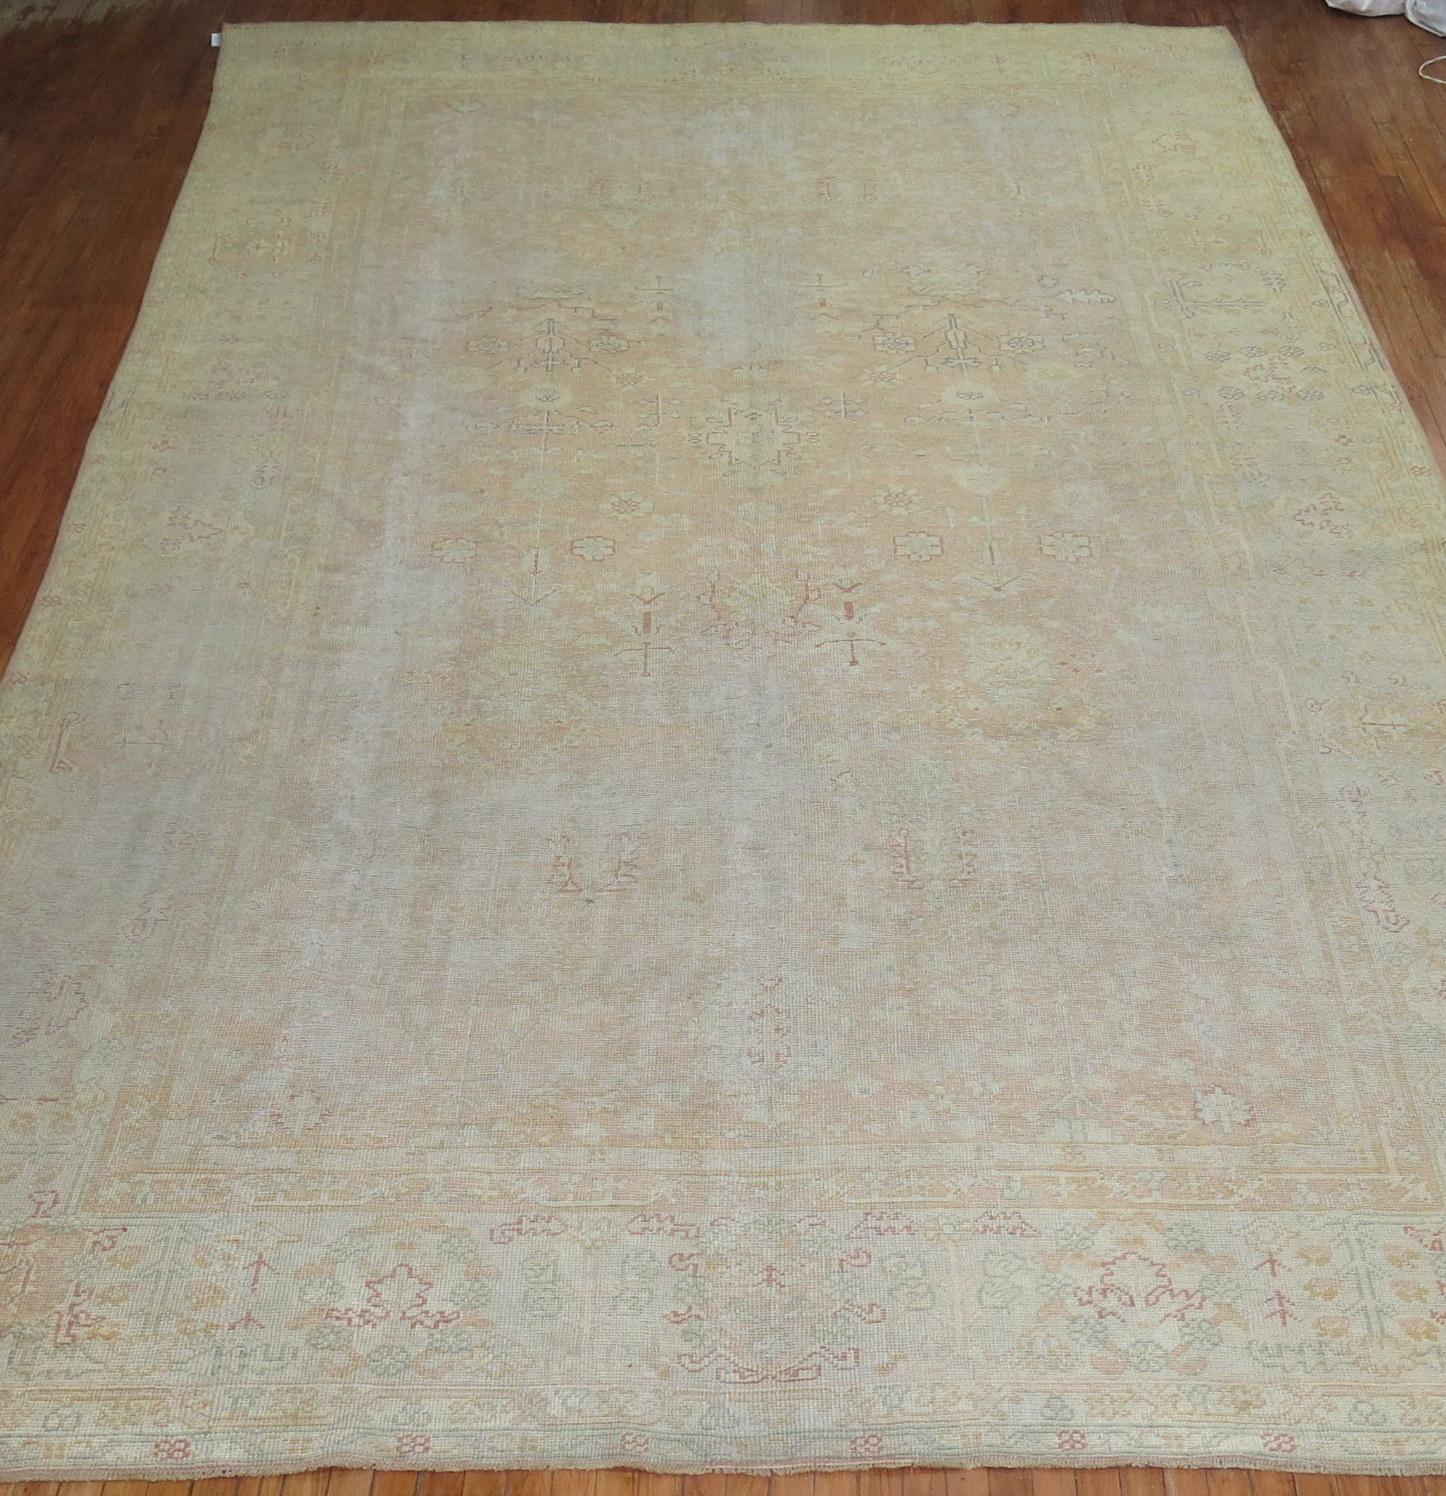 An early 20th century worn oversize antique Turkish Oushak rug in soft peach

Measures: 9'8